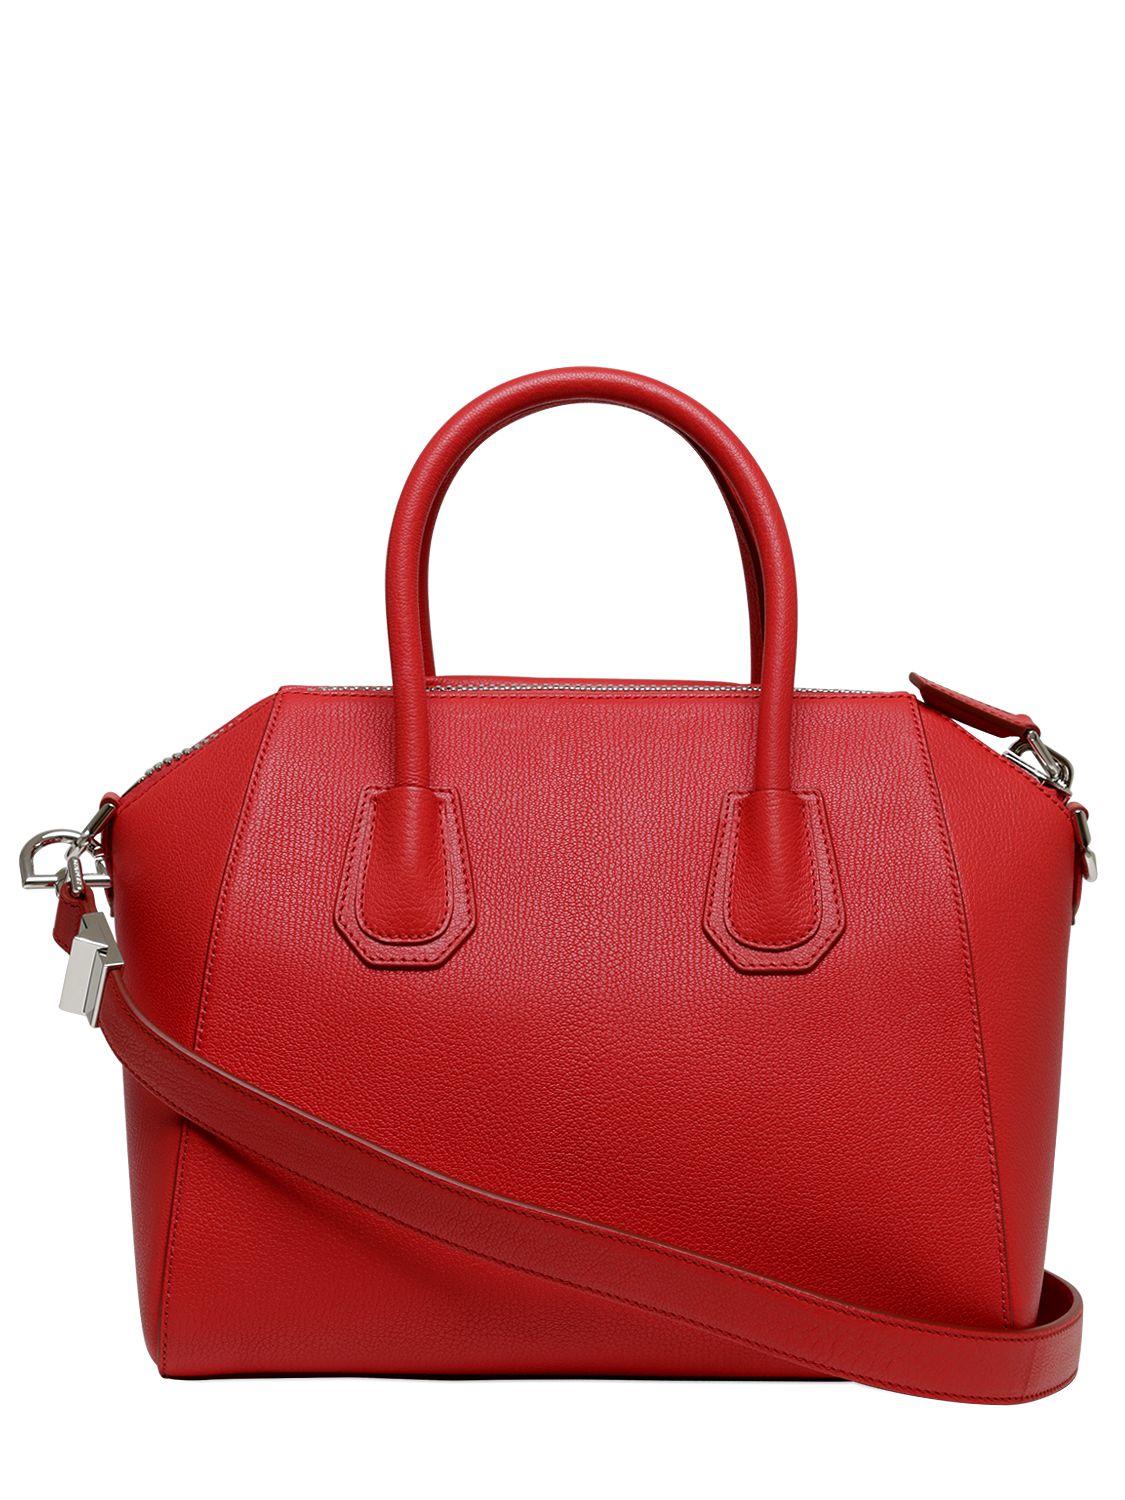 Lyst - Givenchy Small Antigona Leather Tote Bag in Red